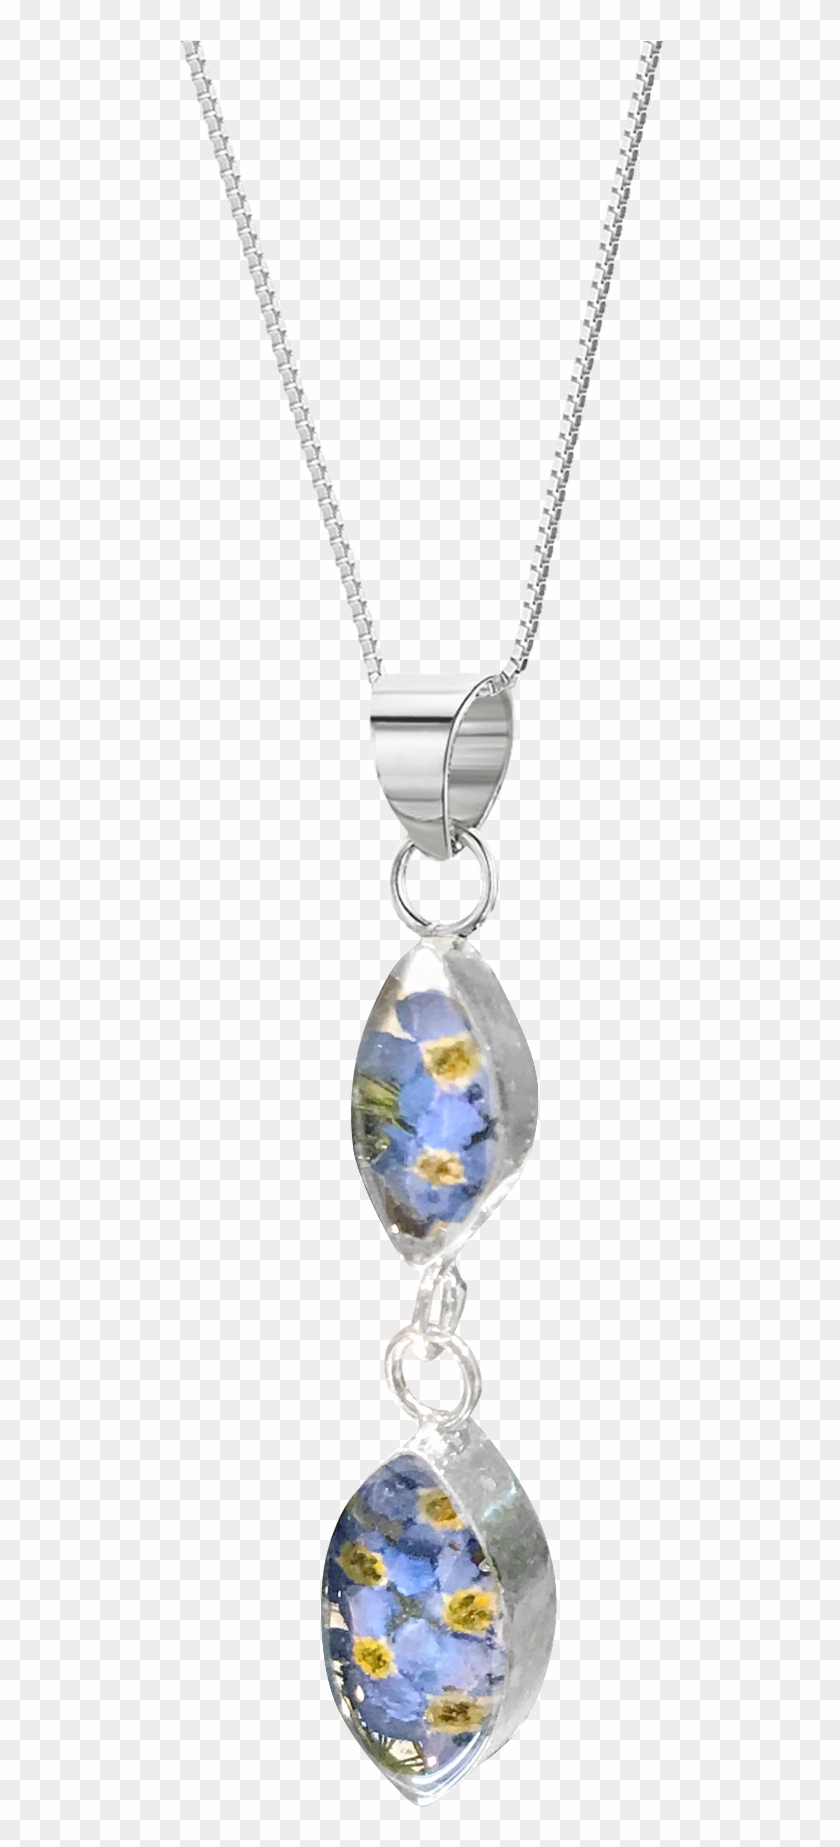 Forget Me Not Necklace Double Oval Sterling Silver - Moon Necklace Rosebud Sterling Silver Real Flower Pendant #1294911